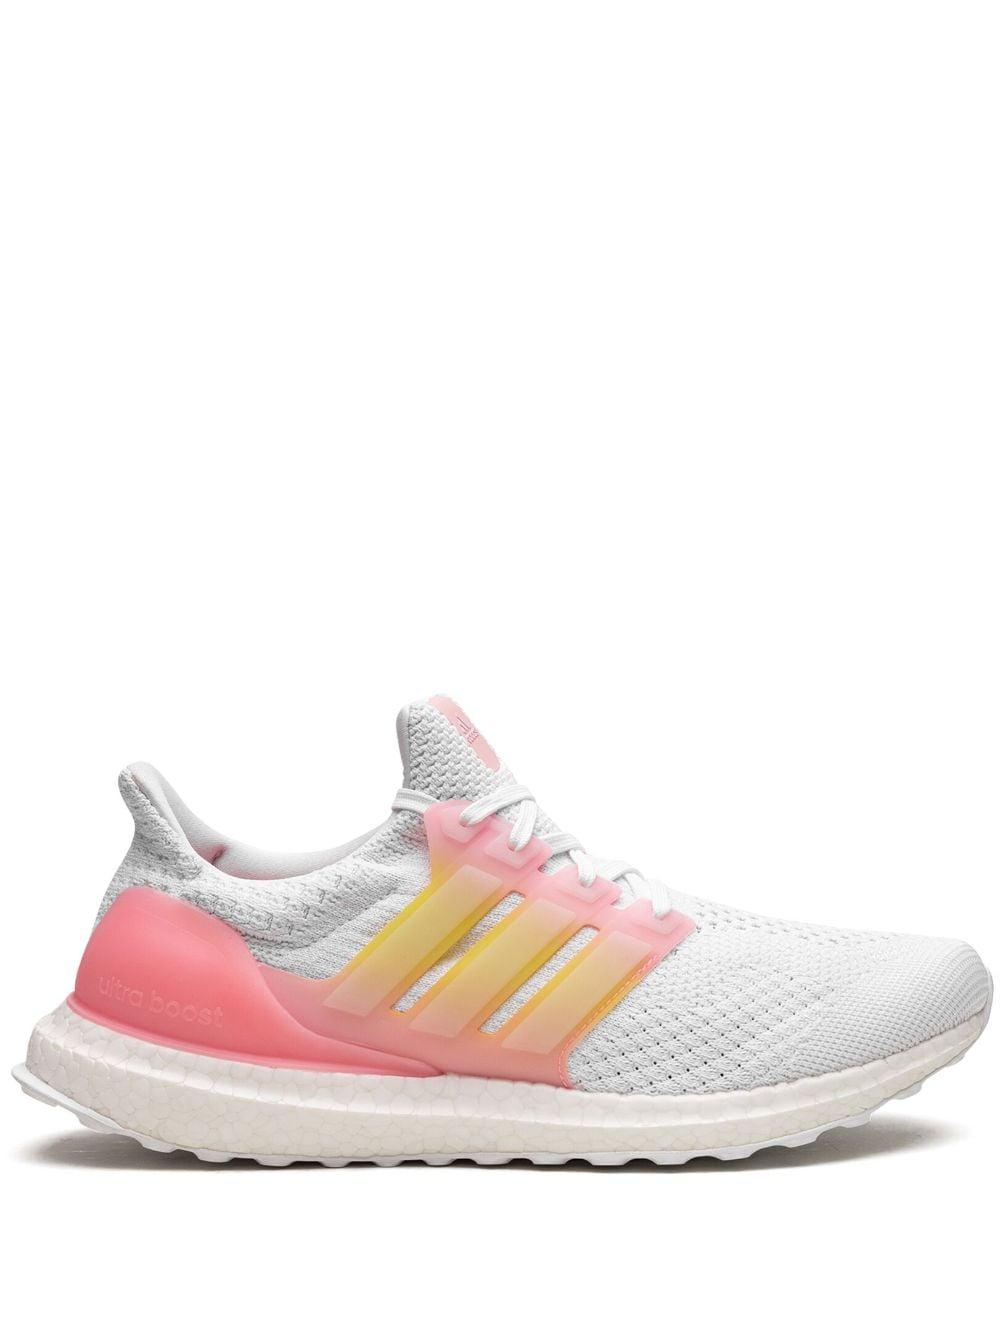 adidas Ultraboost Dna 5.0 Sneakers in Pink | Lyst